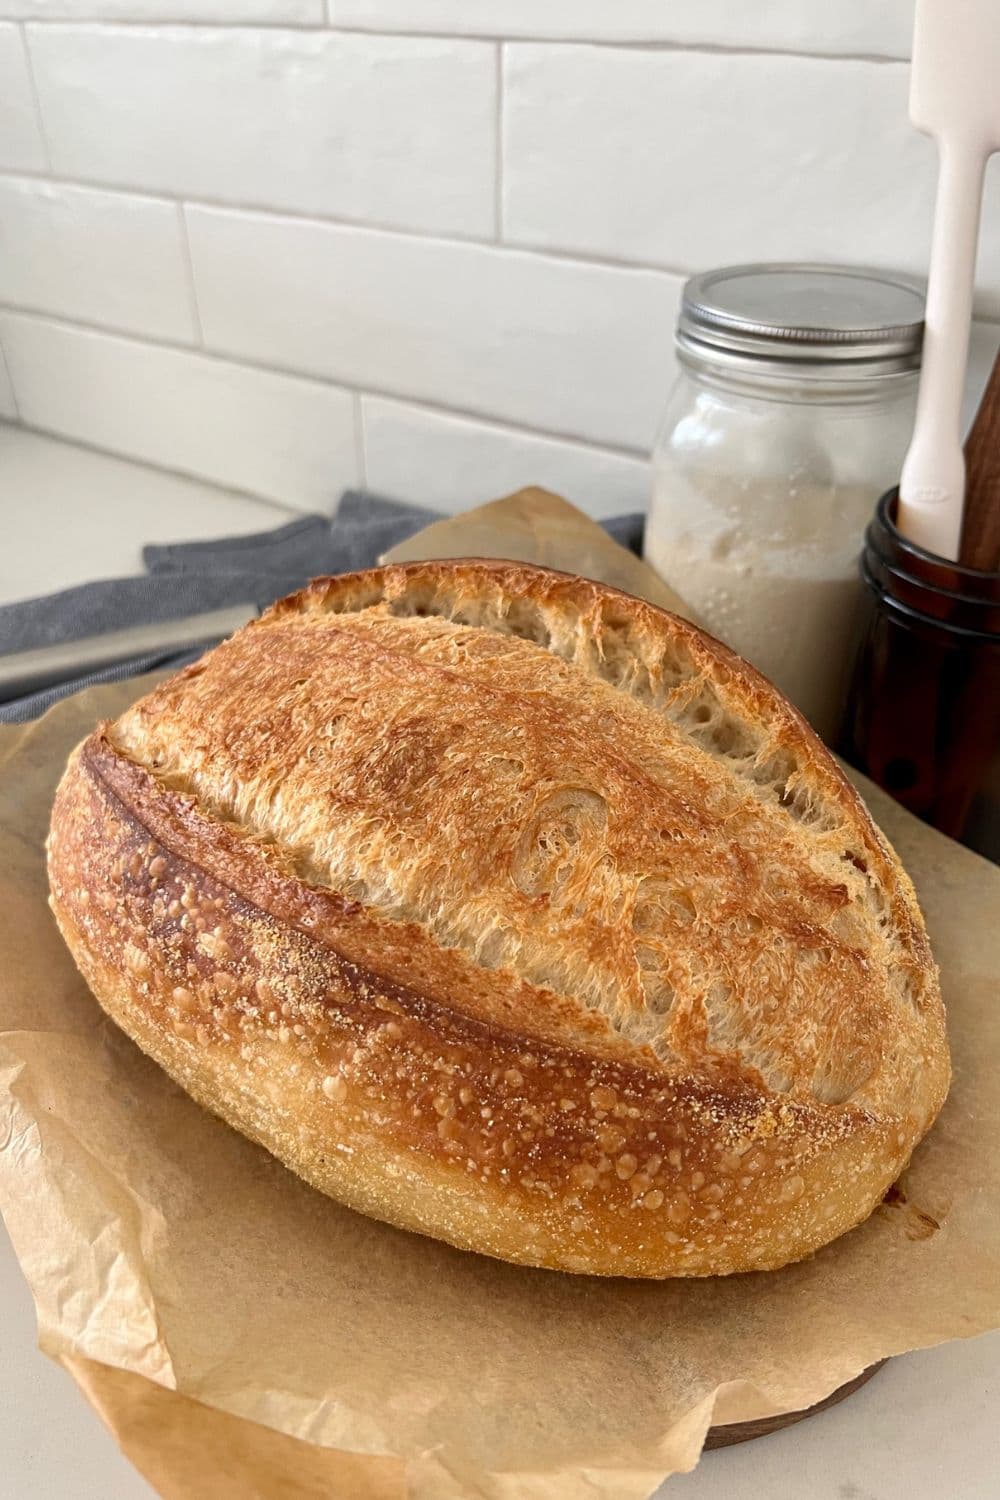 https://www.pantrymama.com/wp-content/uploads/2023/04/HOW-TO-TELL-WHEN-SOURDOUGH-BREAD-IS-DONE-5-1.jpg